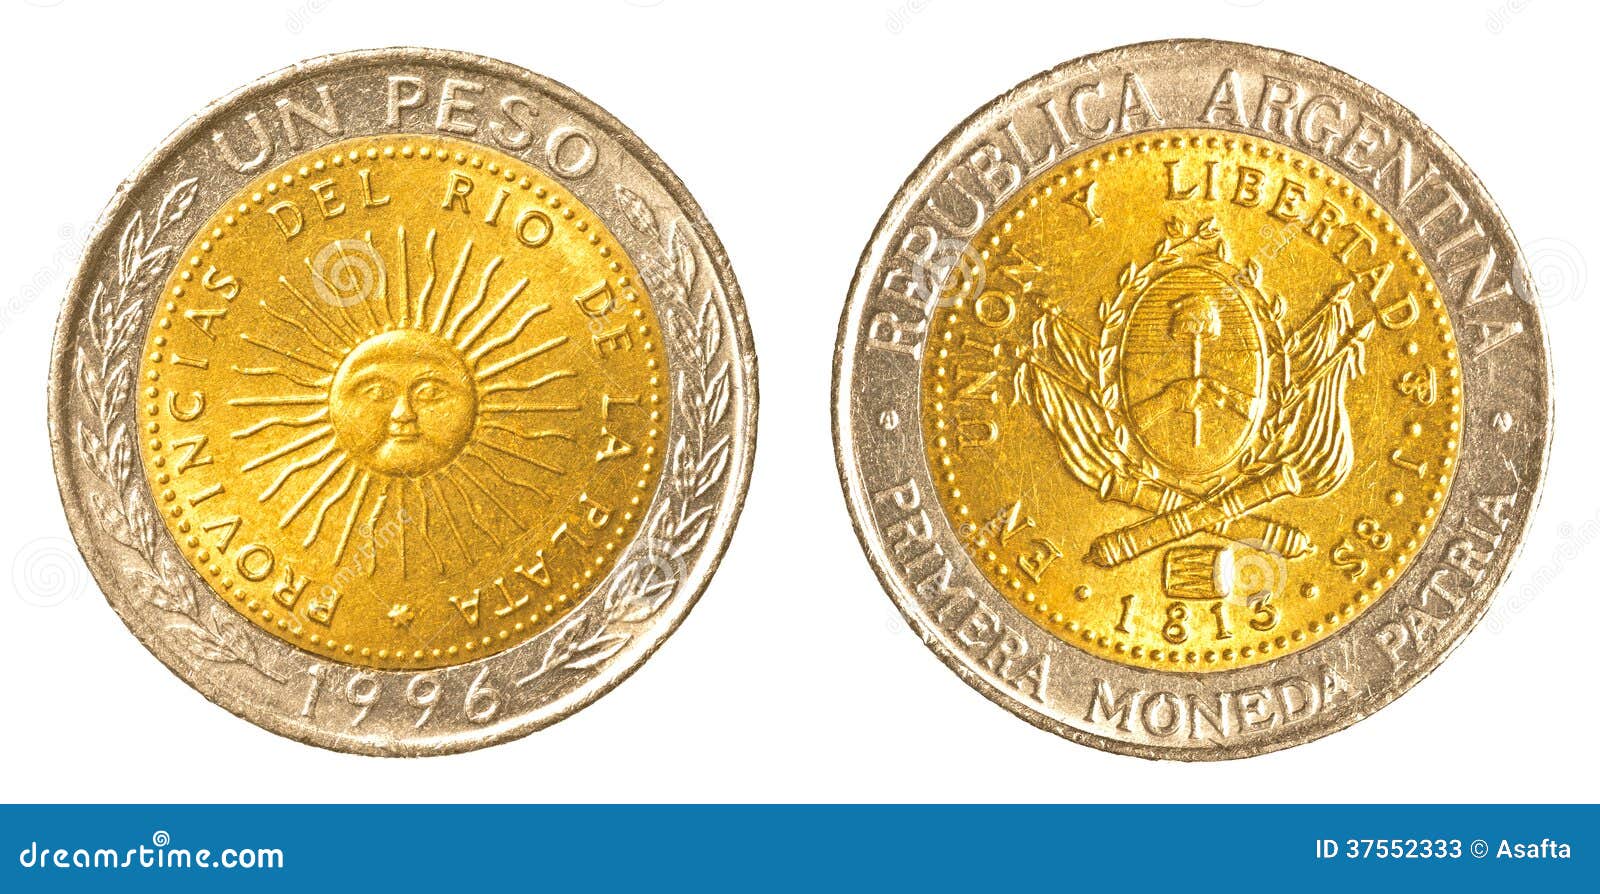 one argentinian peso coin